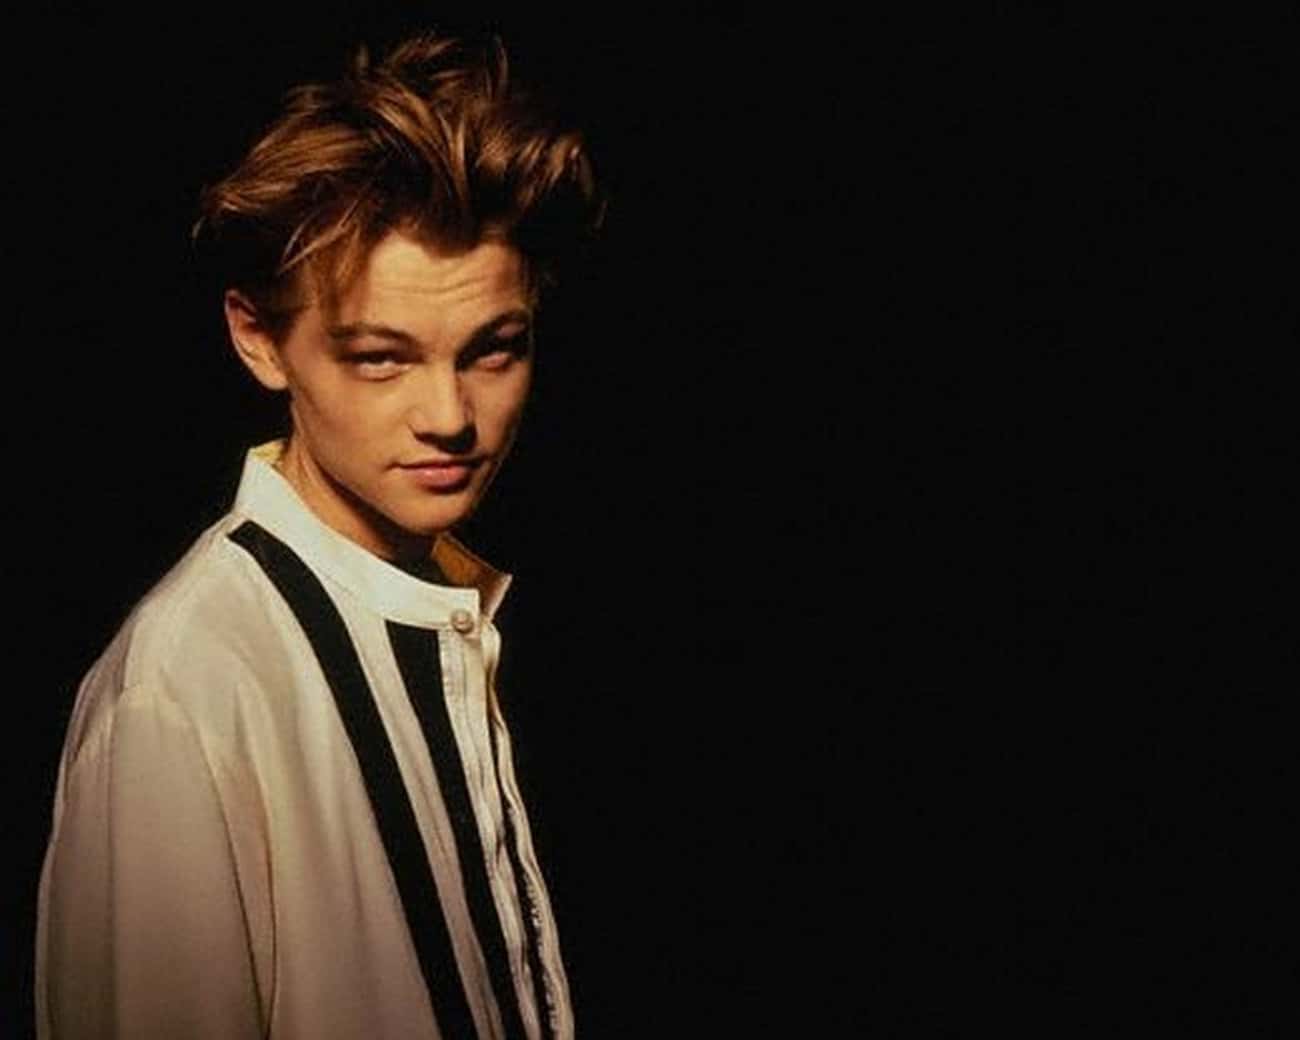 Leonardo DiCaprio Young and Full of Energy